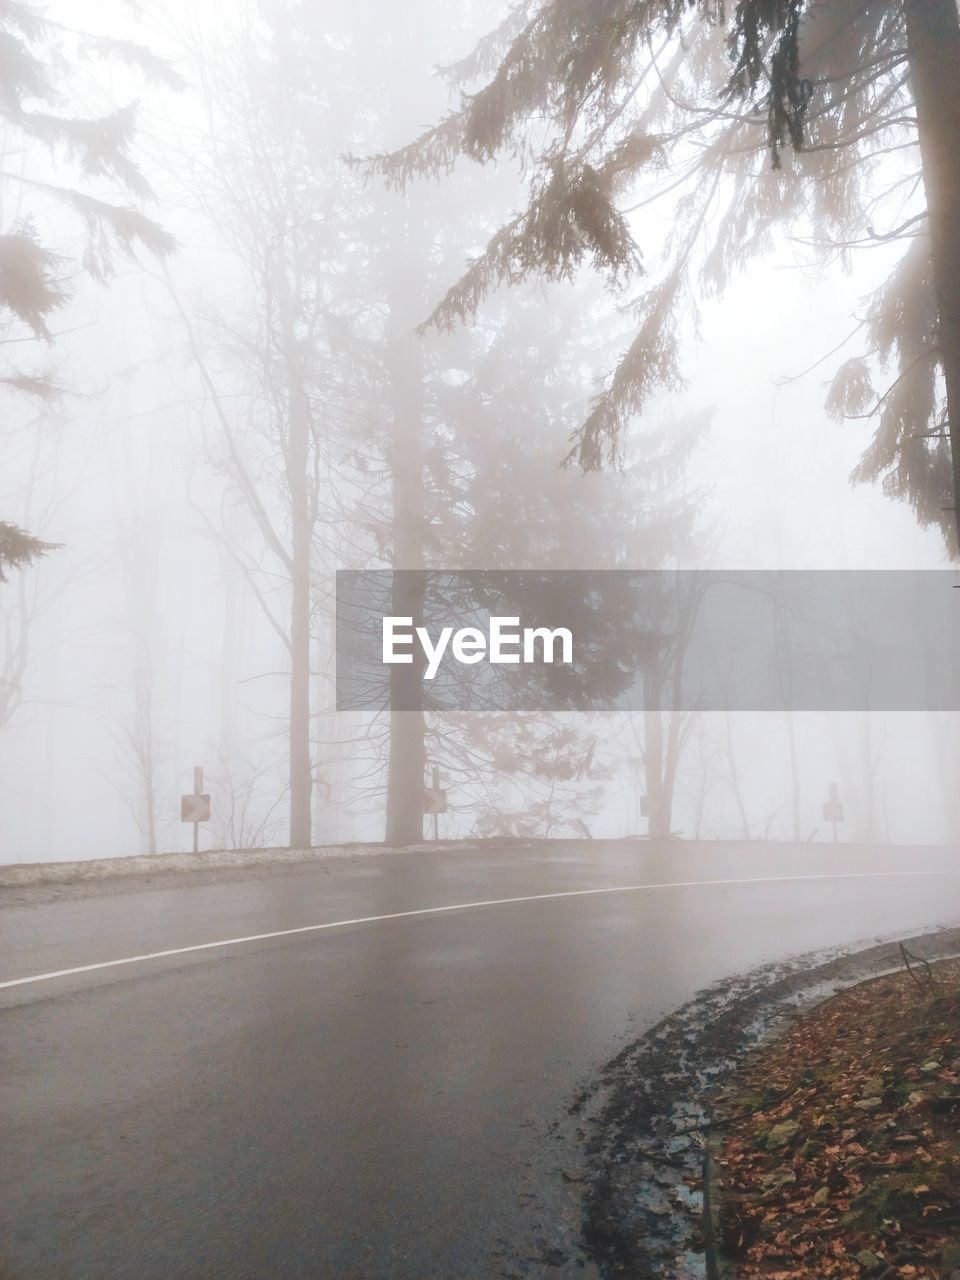 tree, fog, morning, plant, nature, mist, winter, snow, environment, forest, beauty in nature, freezing, cold temperature, land, tranquility, scenics - nature, no people, landscape, water, tranquil scene, sunlight, frost, autumn, outdoors, haze, day, non-urban scene, wet, sky, woodland, travel, road, travel destinations, tree trunk, branch, idyllic